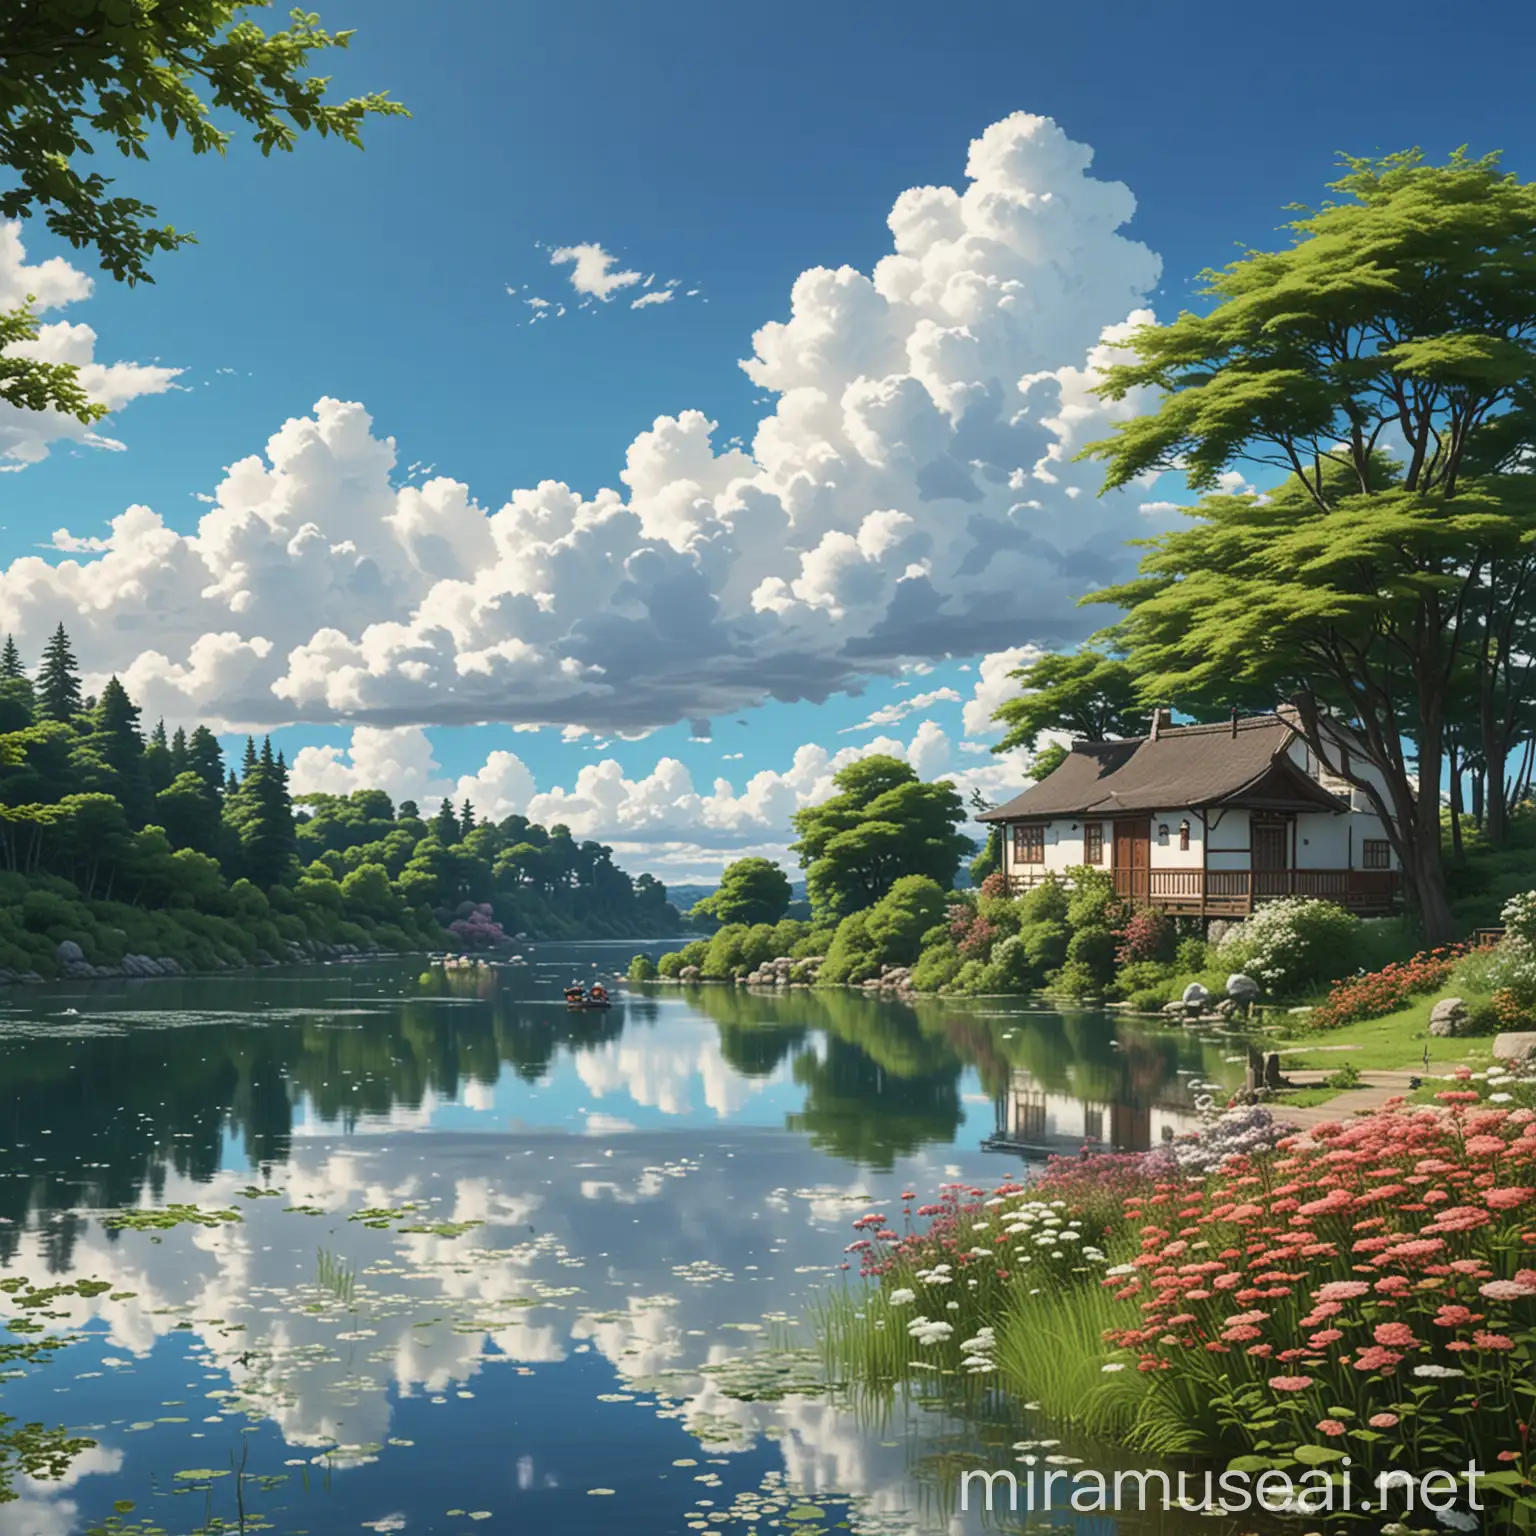 Serene Valley Landscape with Vibrant Flowers and Azure Sky Inspired by Studio Ghibli Anime